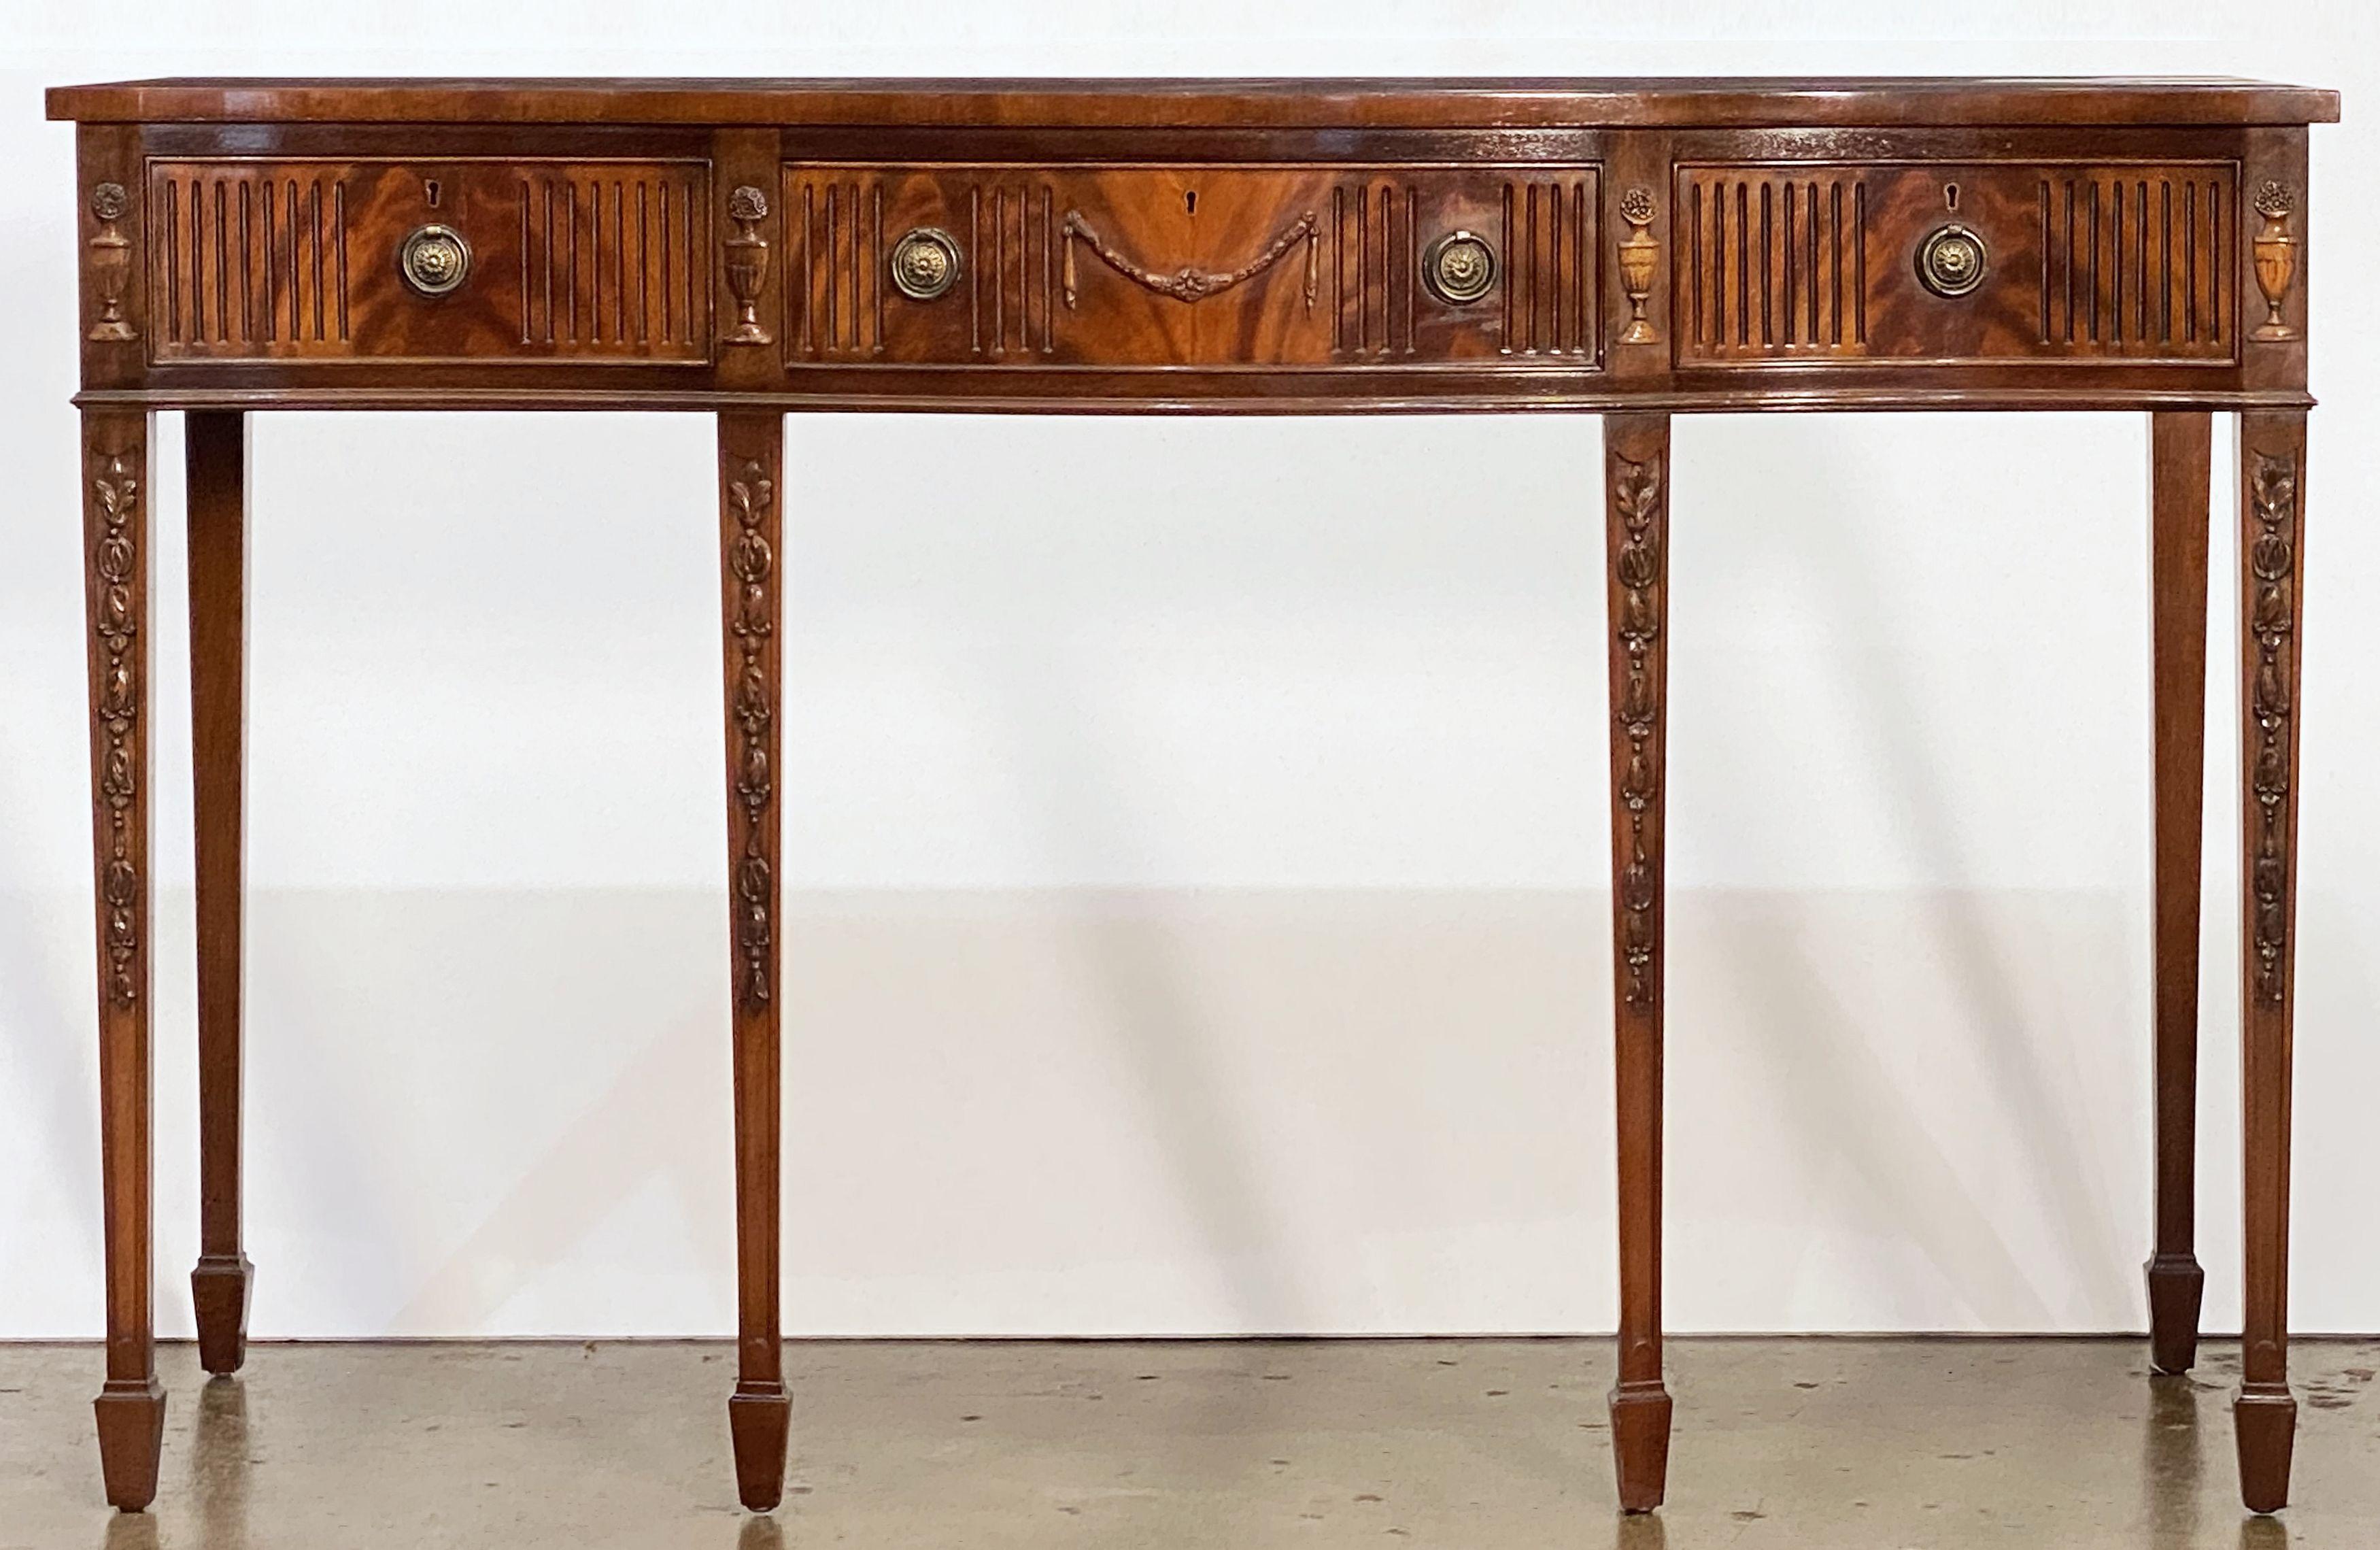 A large English console server or buffet table of mahogany in the Sheraton style, featuring a serpentine top over a frieze of three drawers, with beautifully carved urns in between the drawer fronts and down the tapered legs. 
The drawers of solid